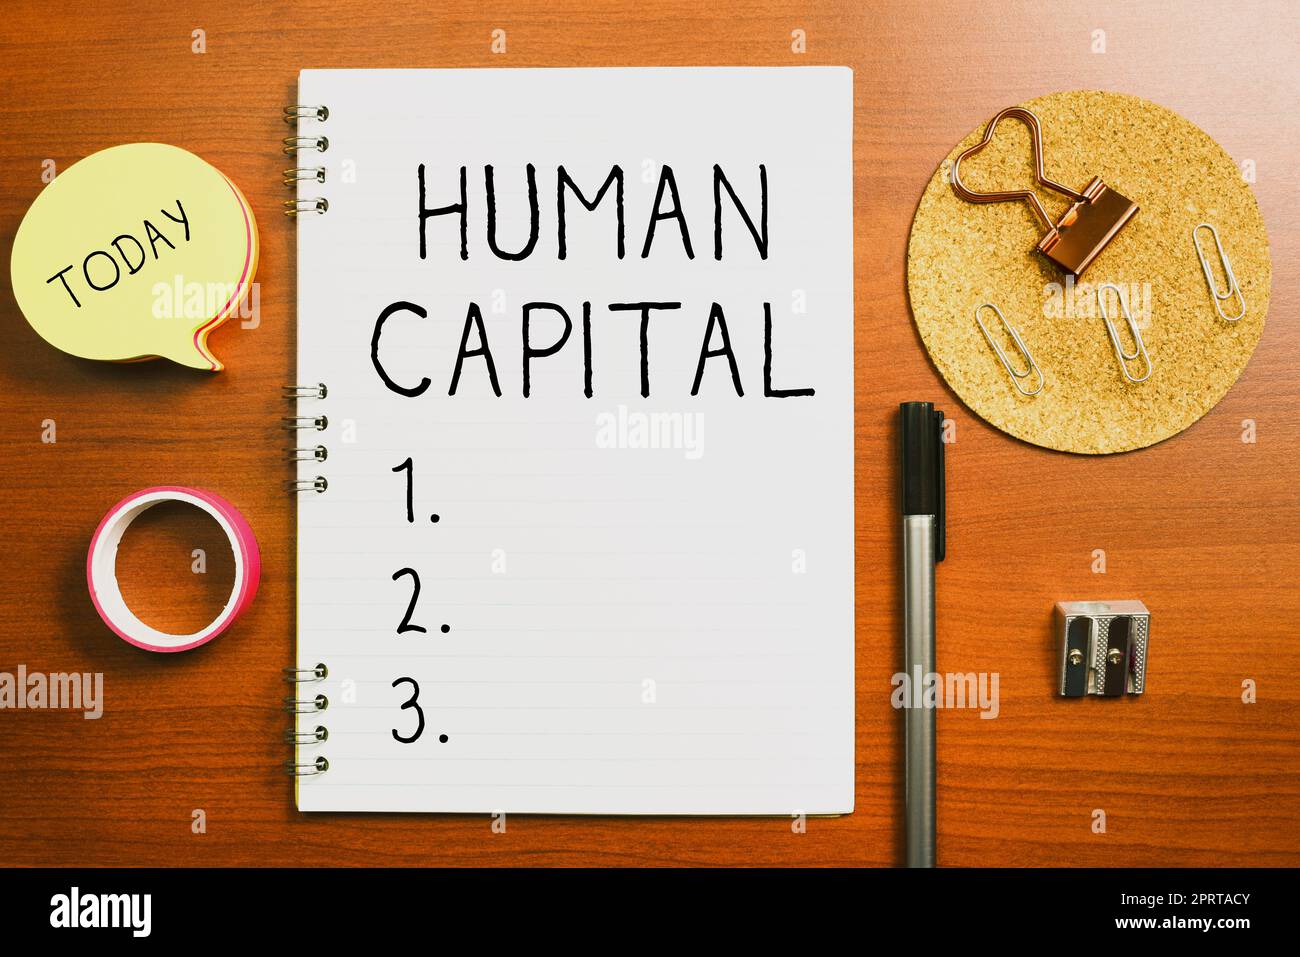 Sign displaying Human Capital. Business approach Intangible Collective Resources Competence Capital Education Stock Photo